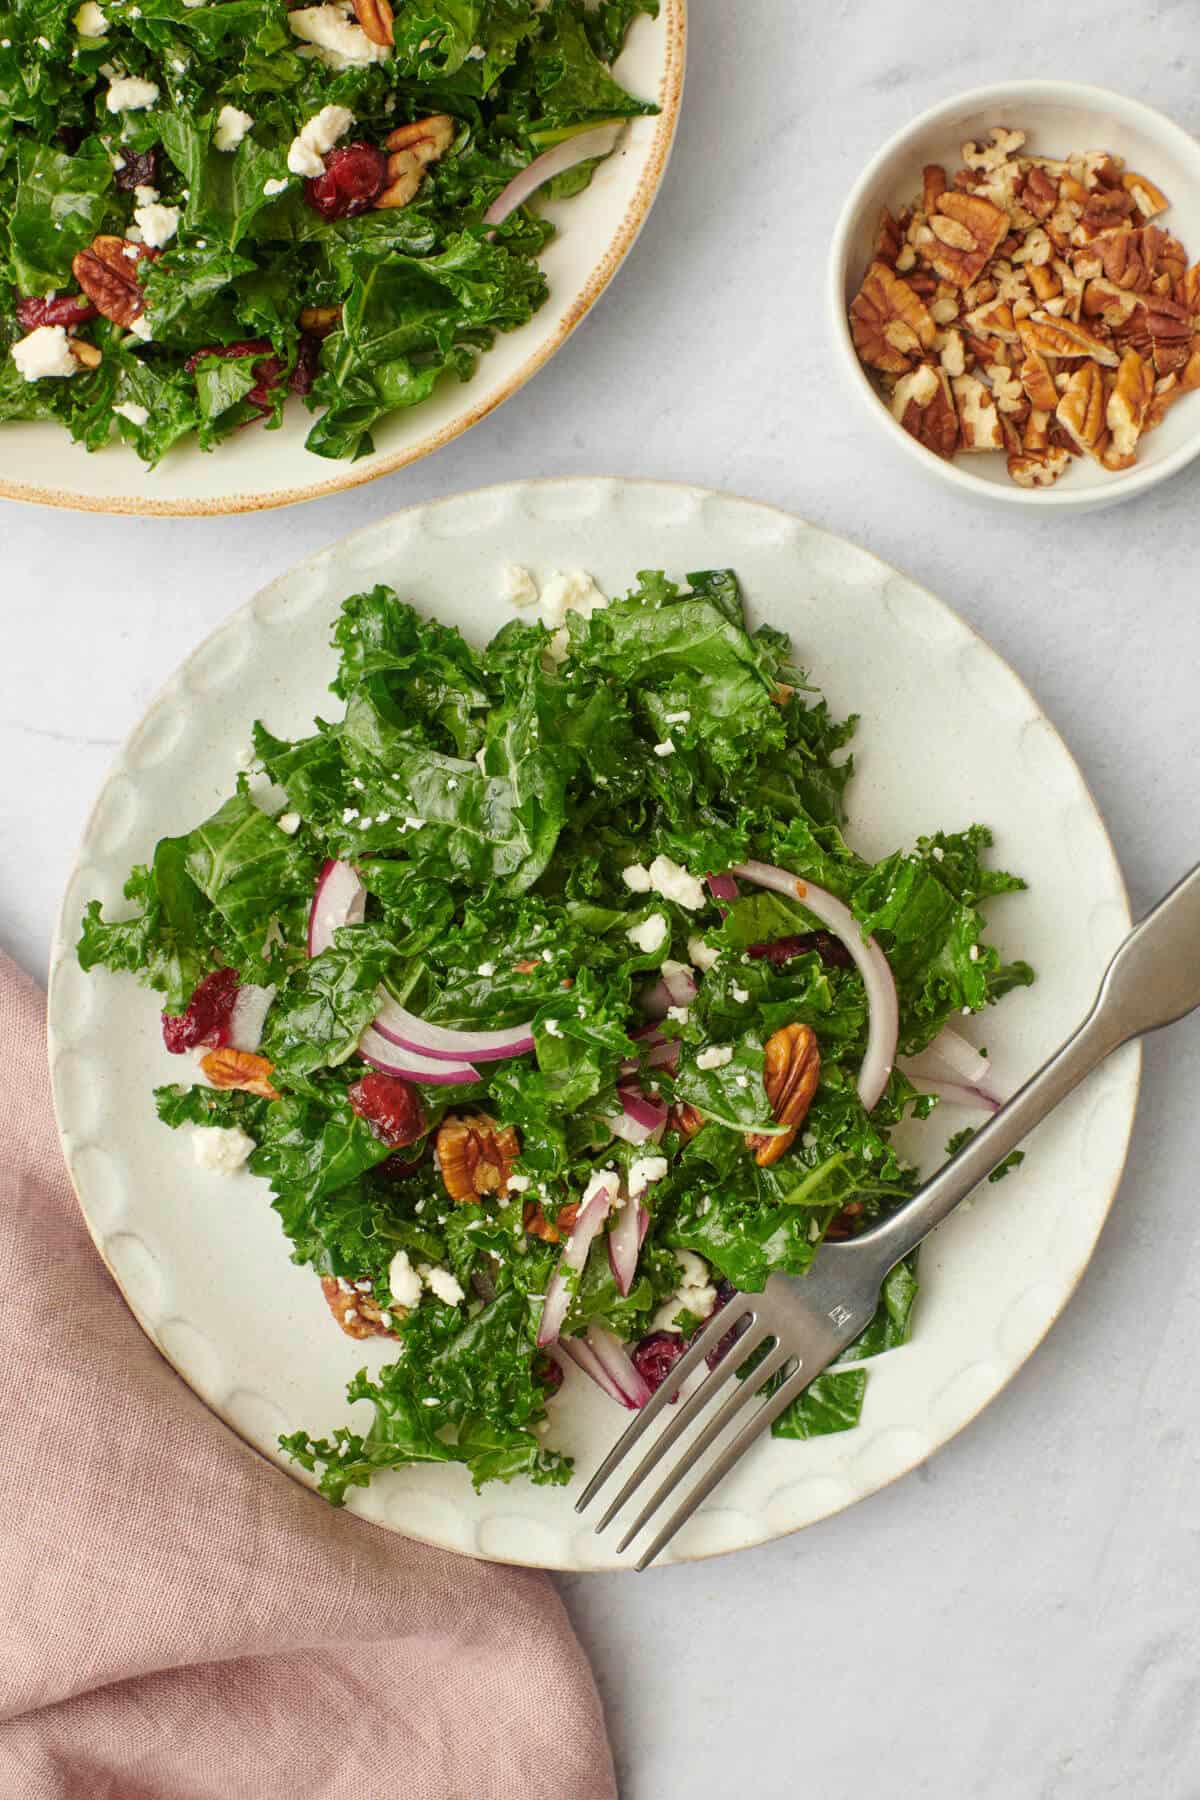 Easy kale salad on a plate next to platter.